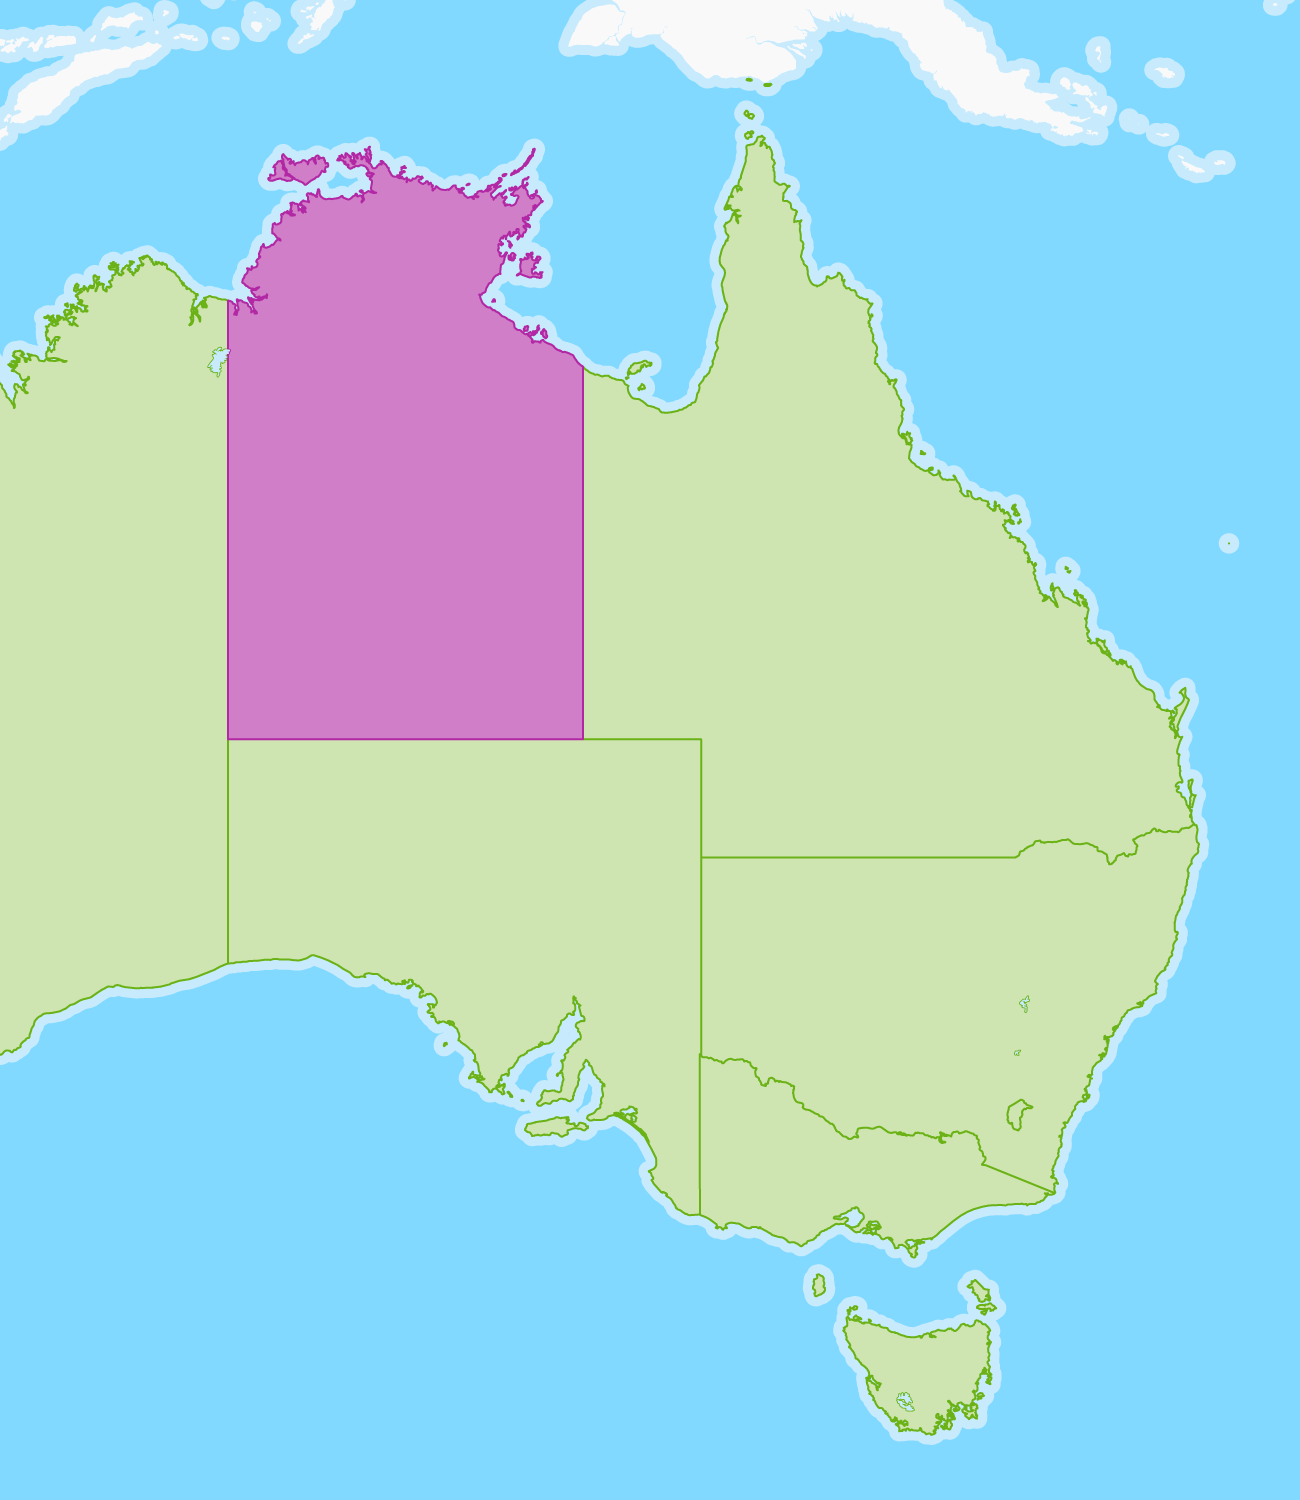 Australian States and Territories Flashcards | Free Study Maps